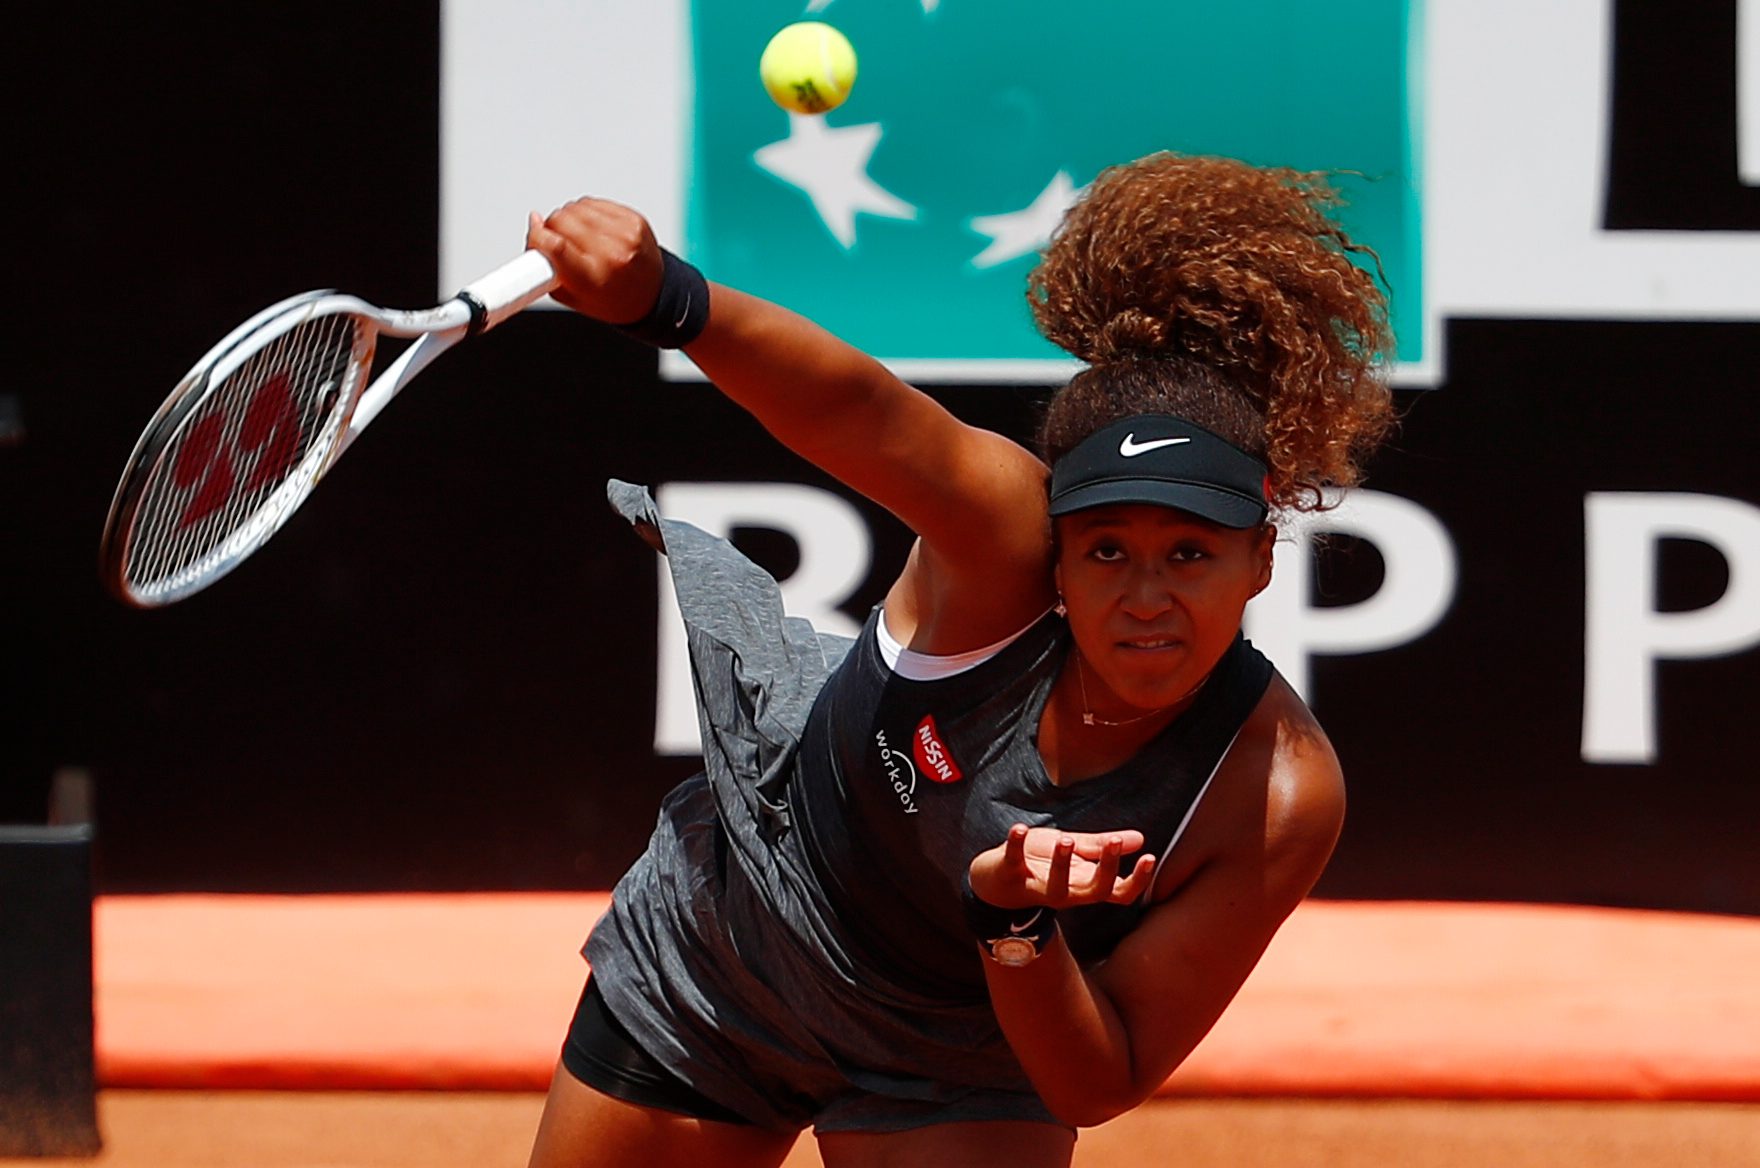 Mental health app Calm to pay Naomi Osaka media fine, other opt-outs